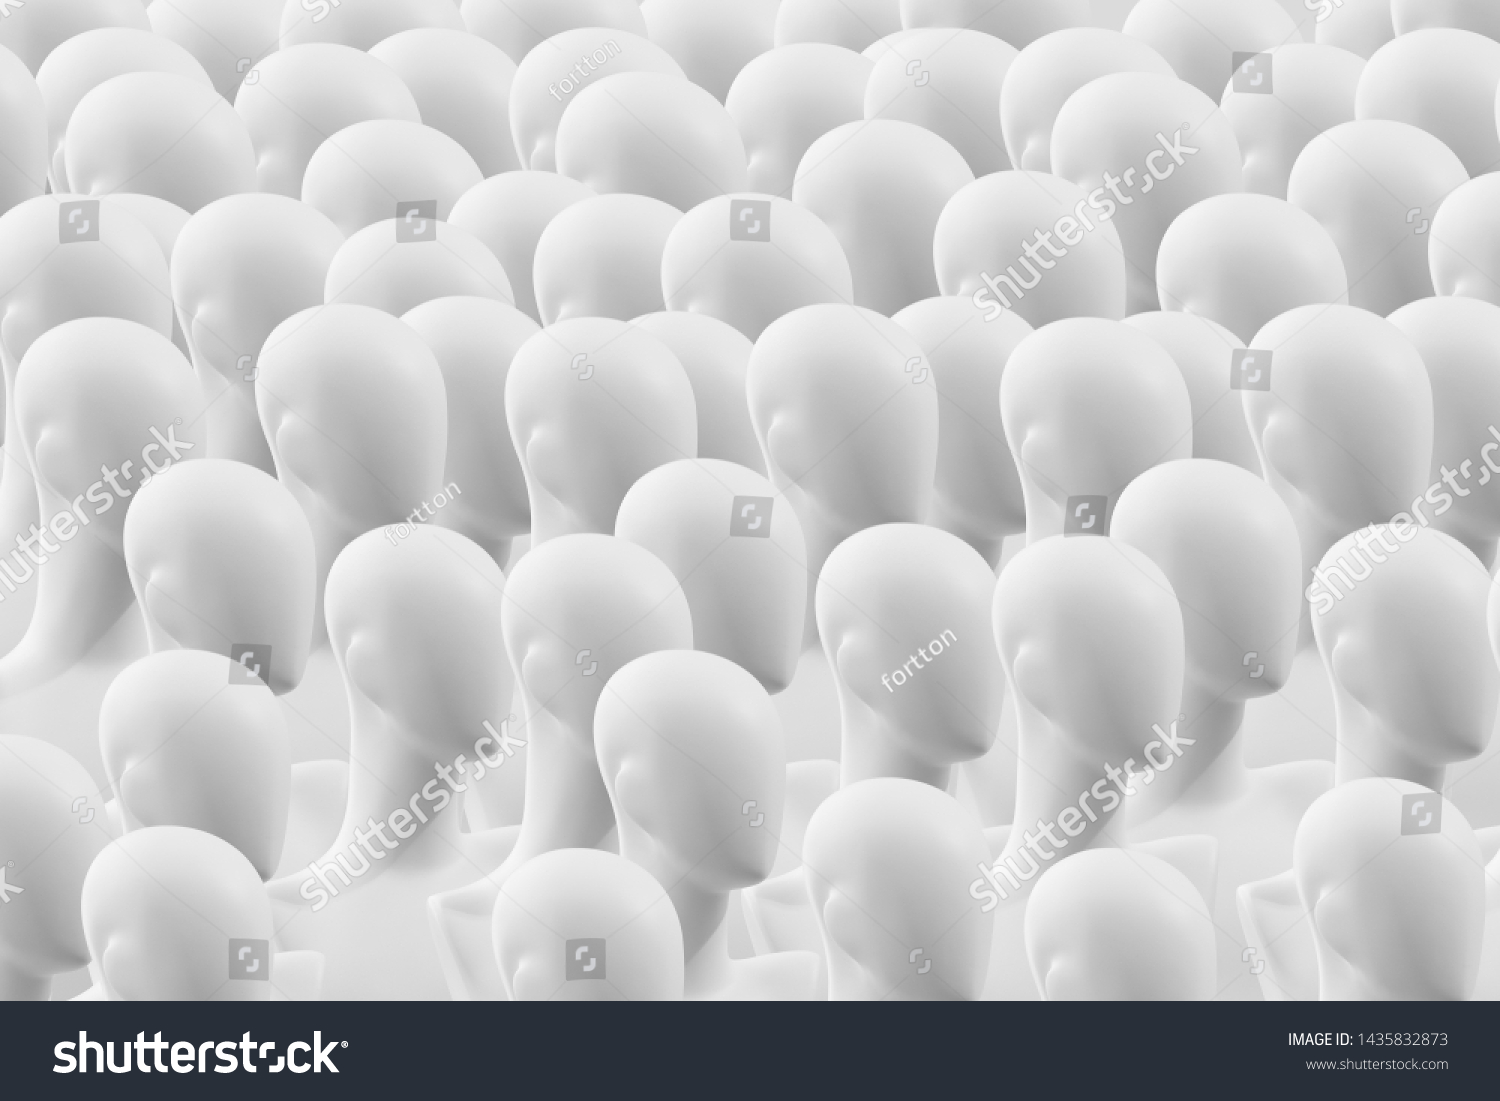 A crowd of people dummies. Concept. Many faceless mannequins heads. People are mannequins. Mannequins without eyes. The concept of human society. #1435832873